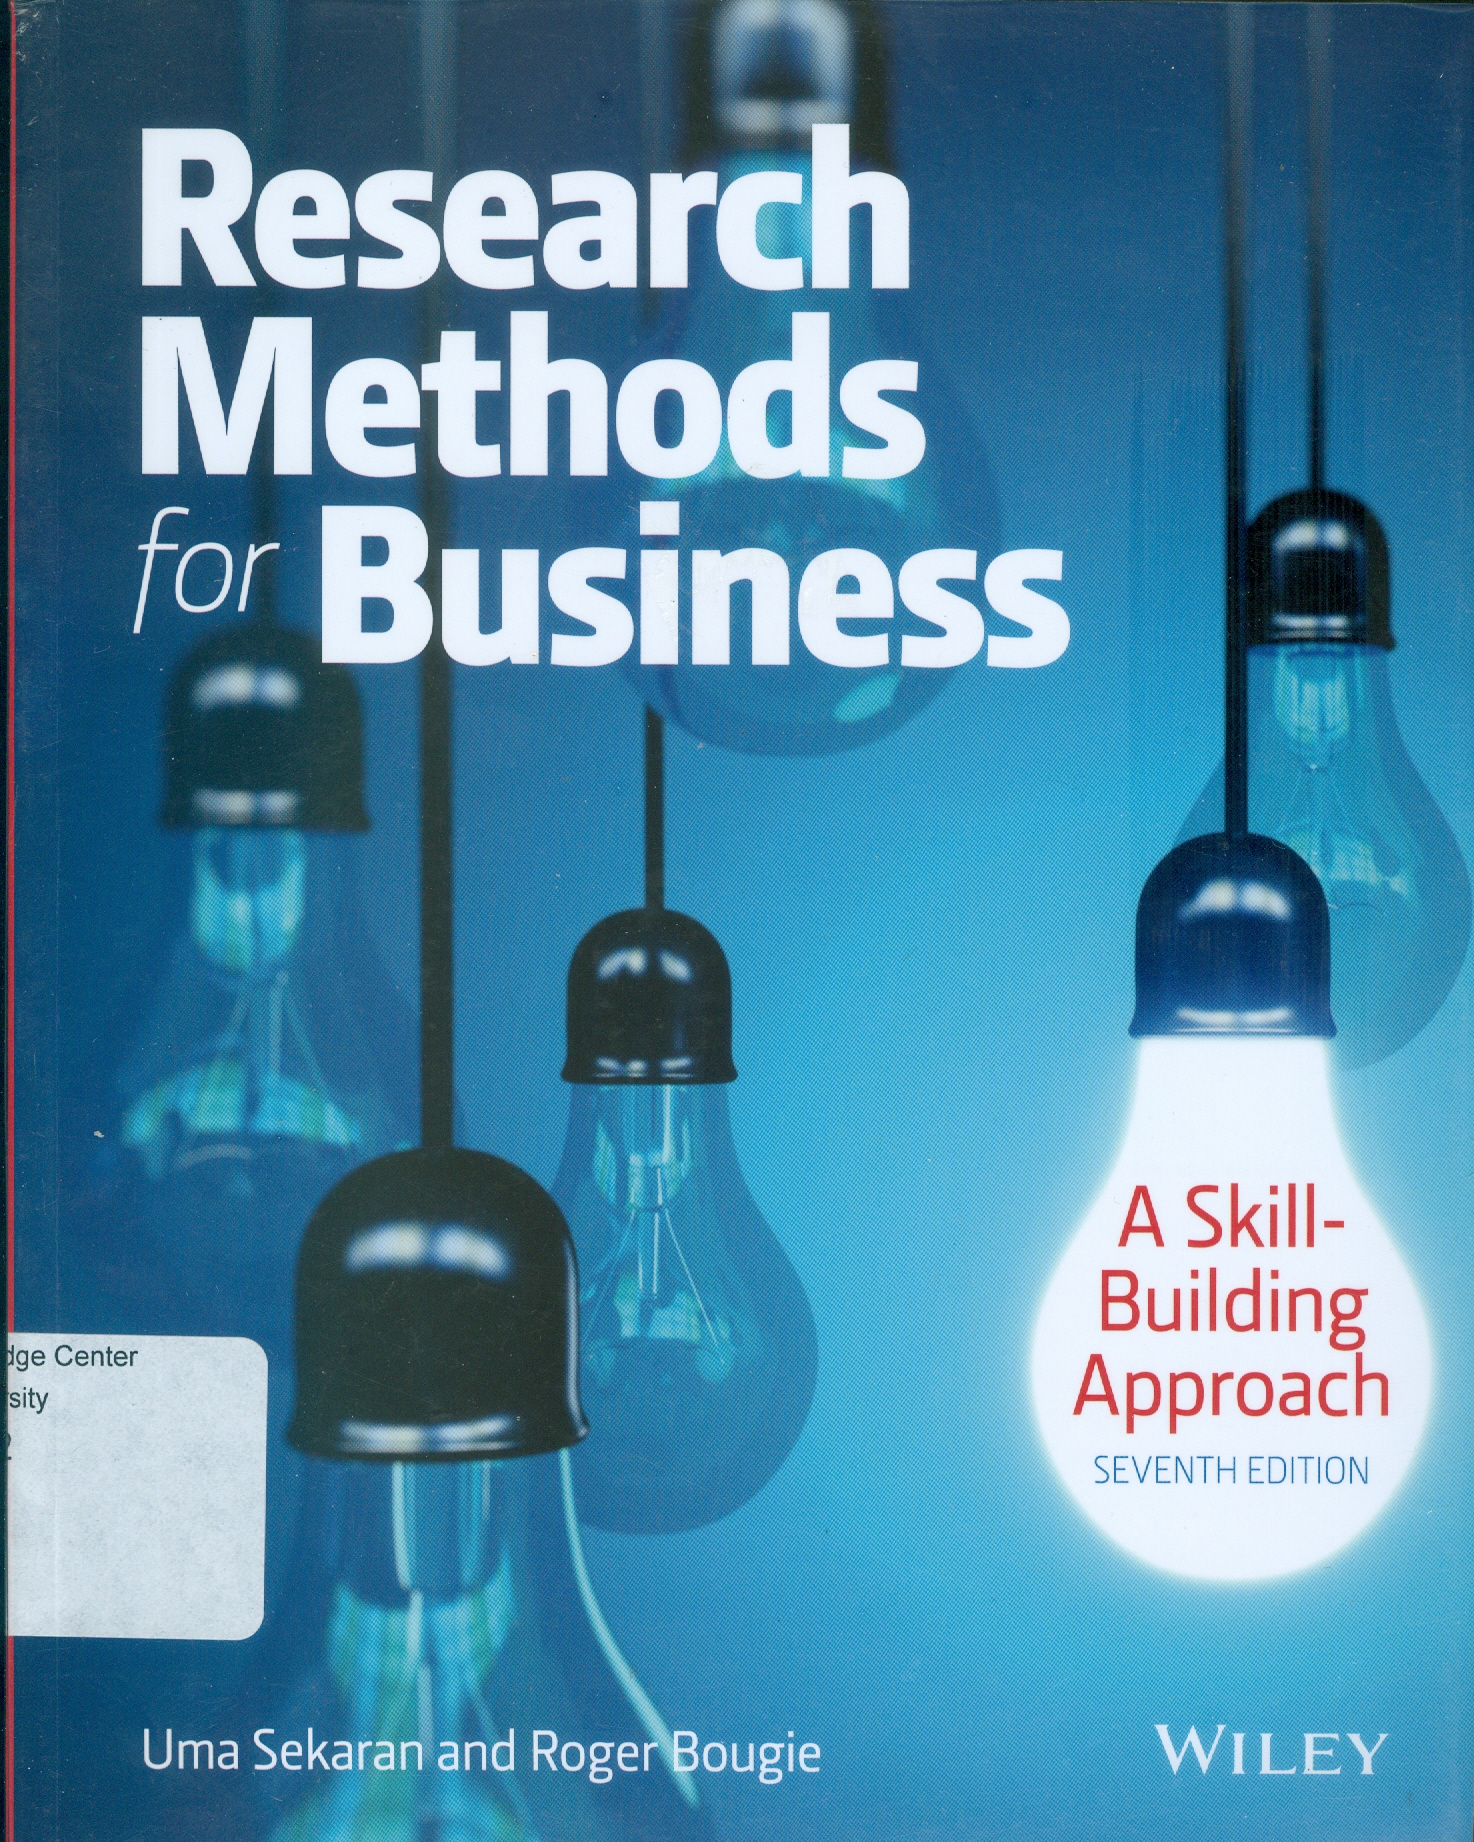 Research Methods for Business0001.jpg